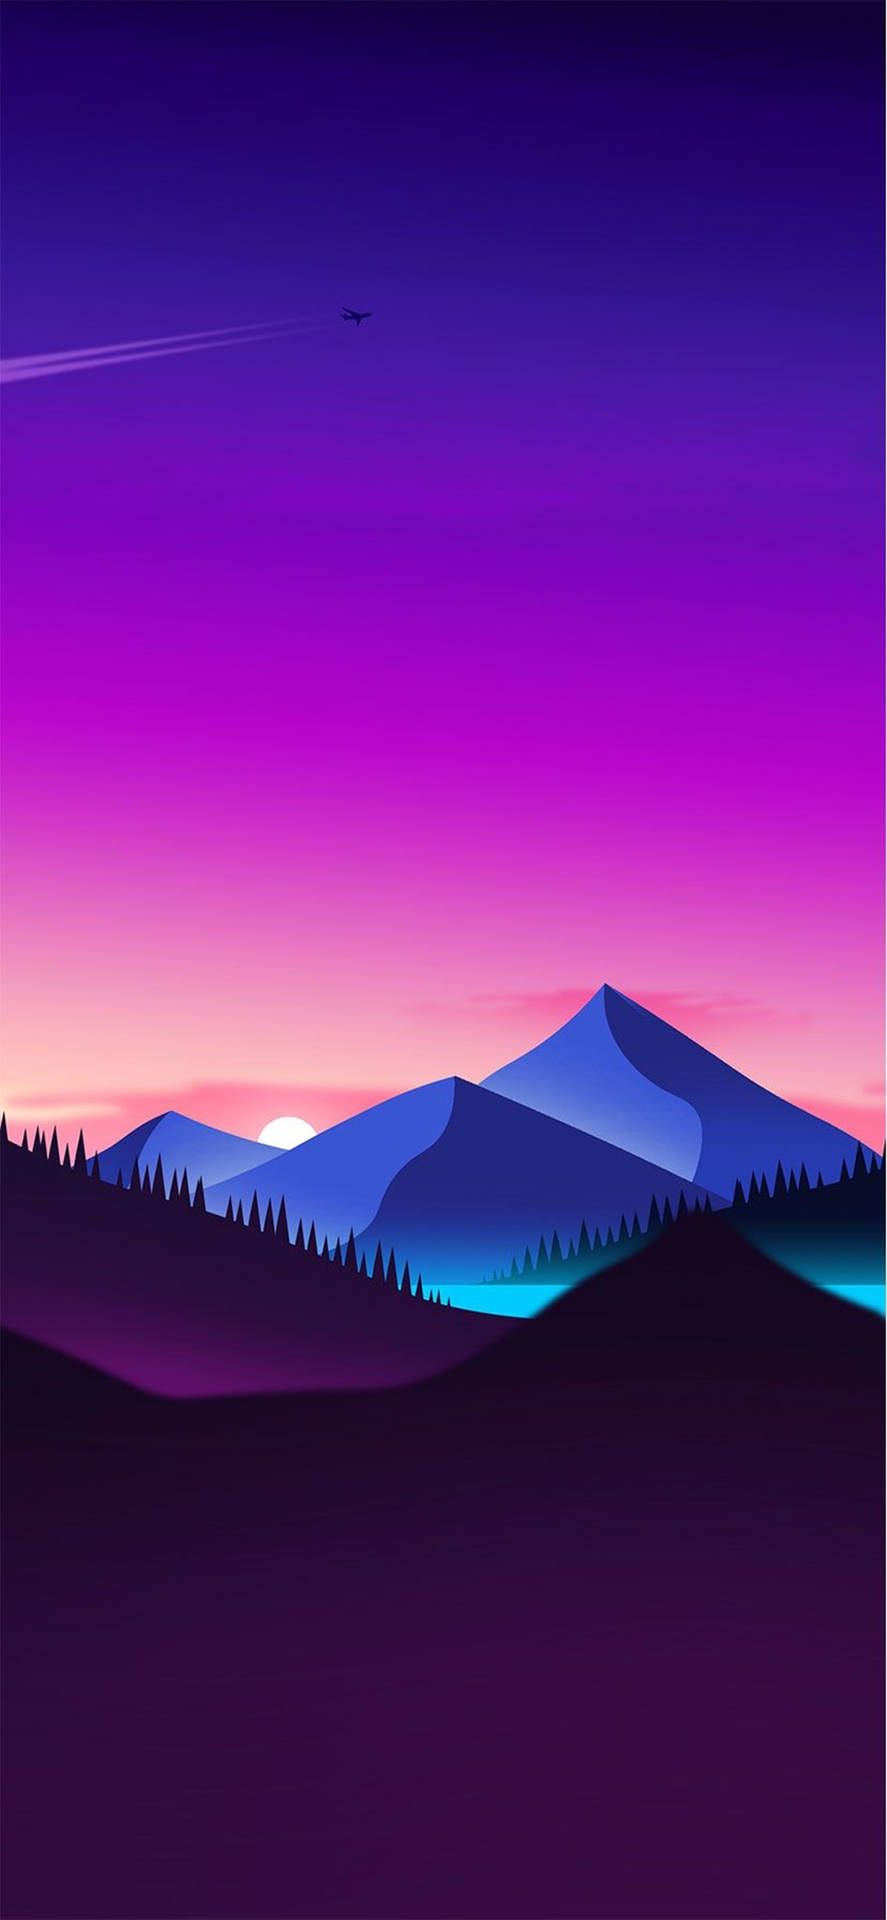 Download the new wallpaper for the Google Pixel 2 and Pixel 2 XL - Vaporwave